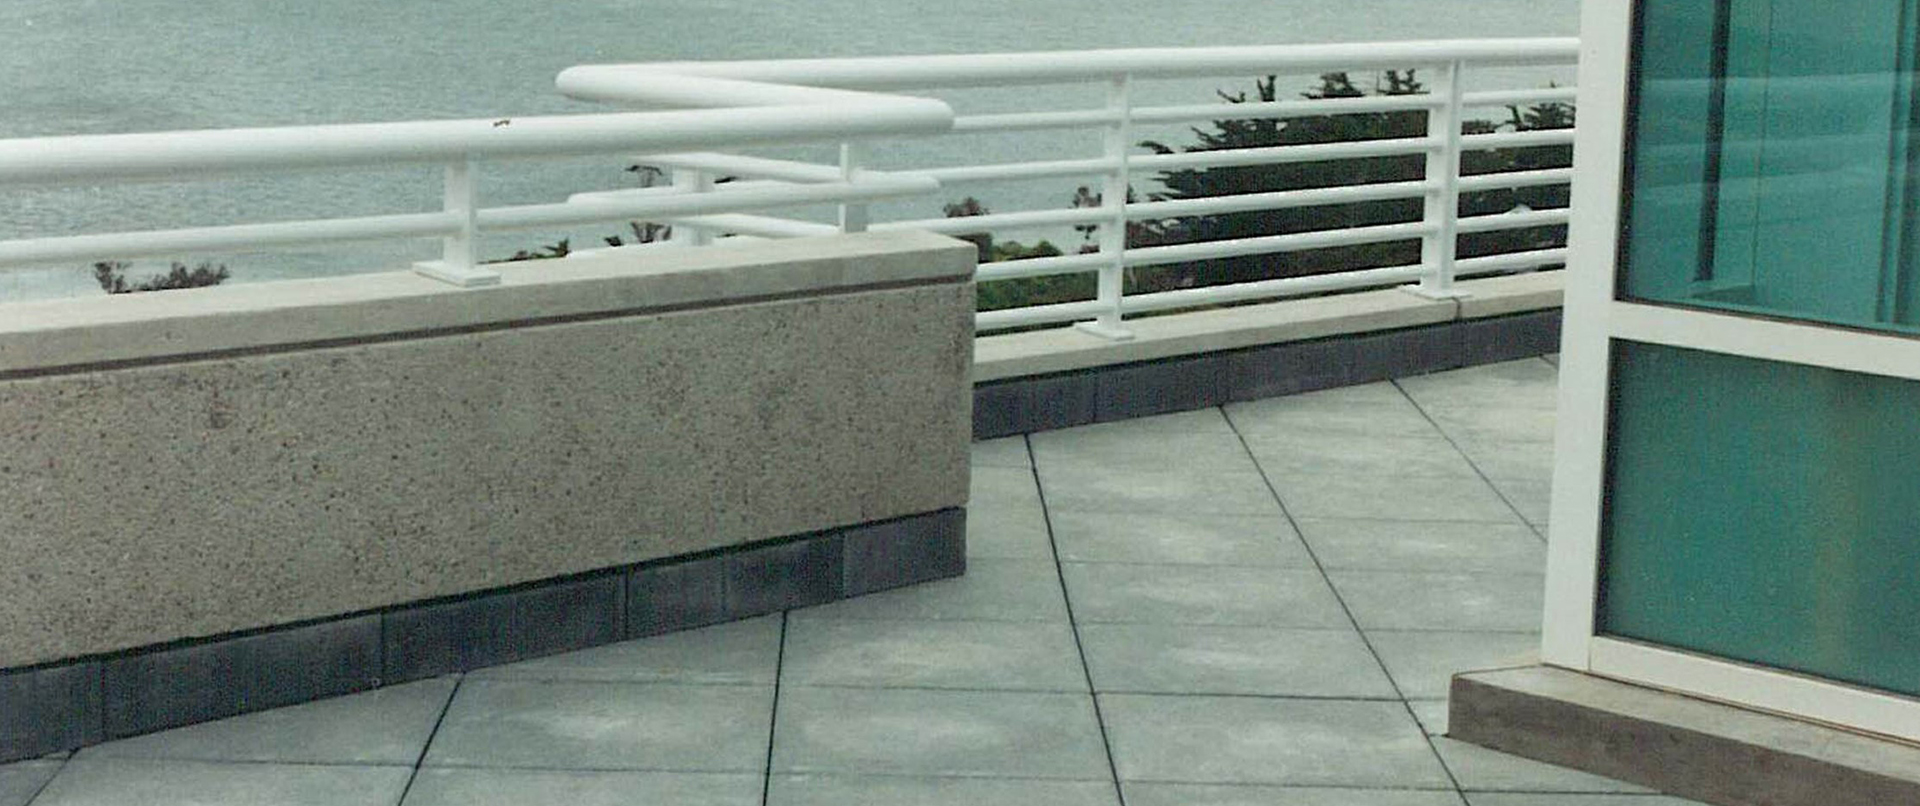 rooftop deck for commercial building